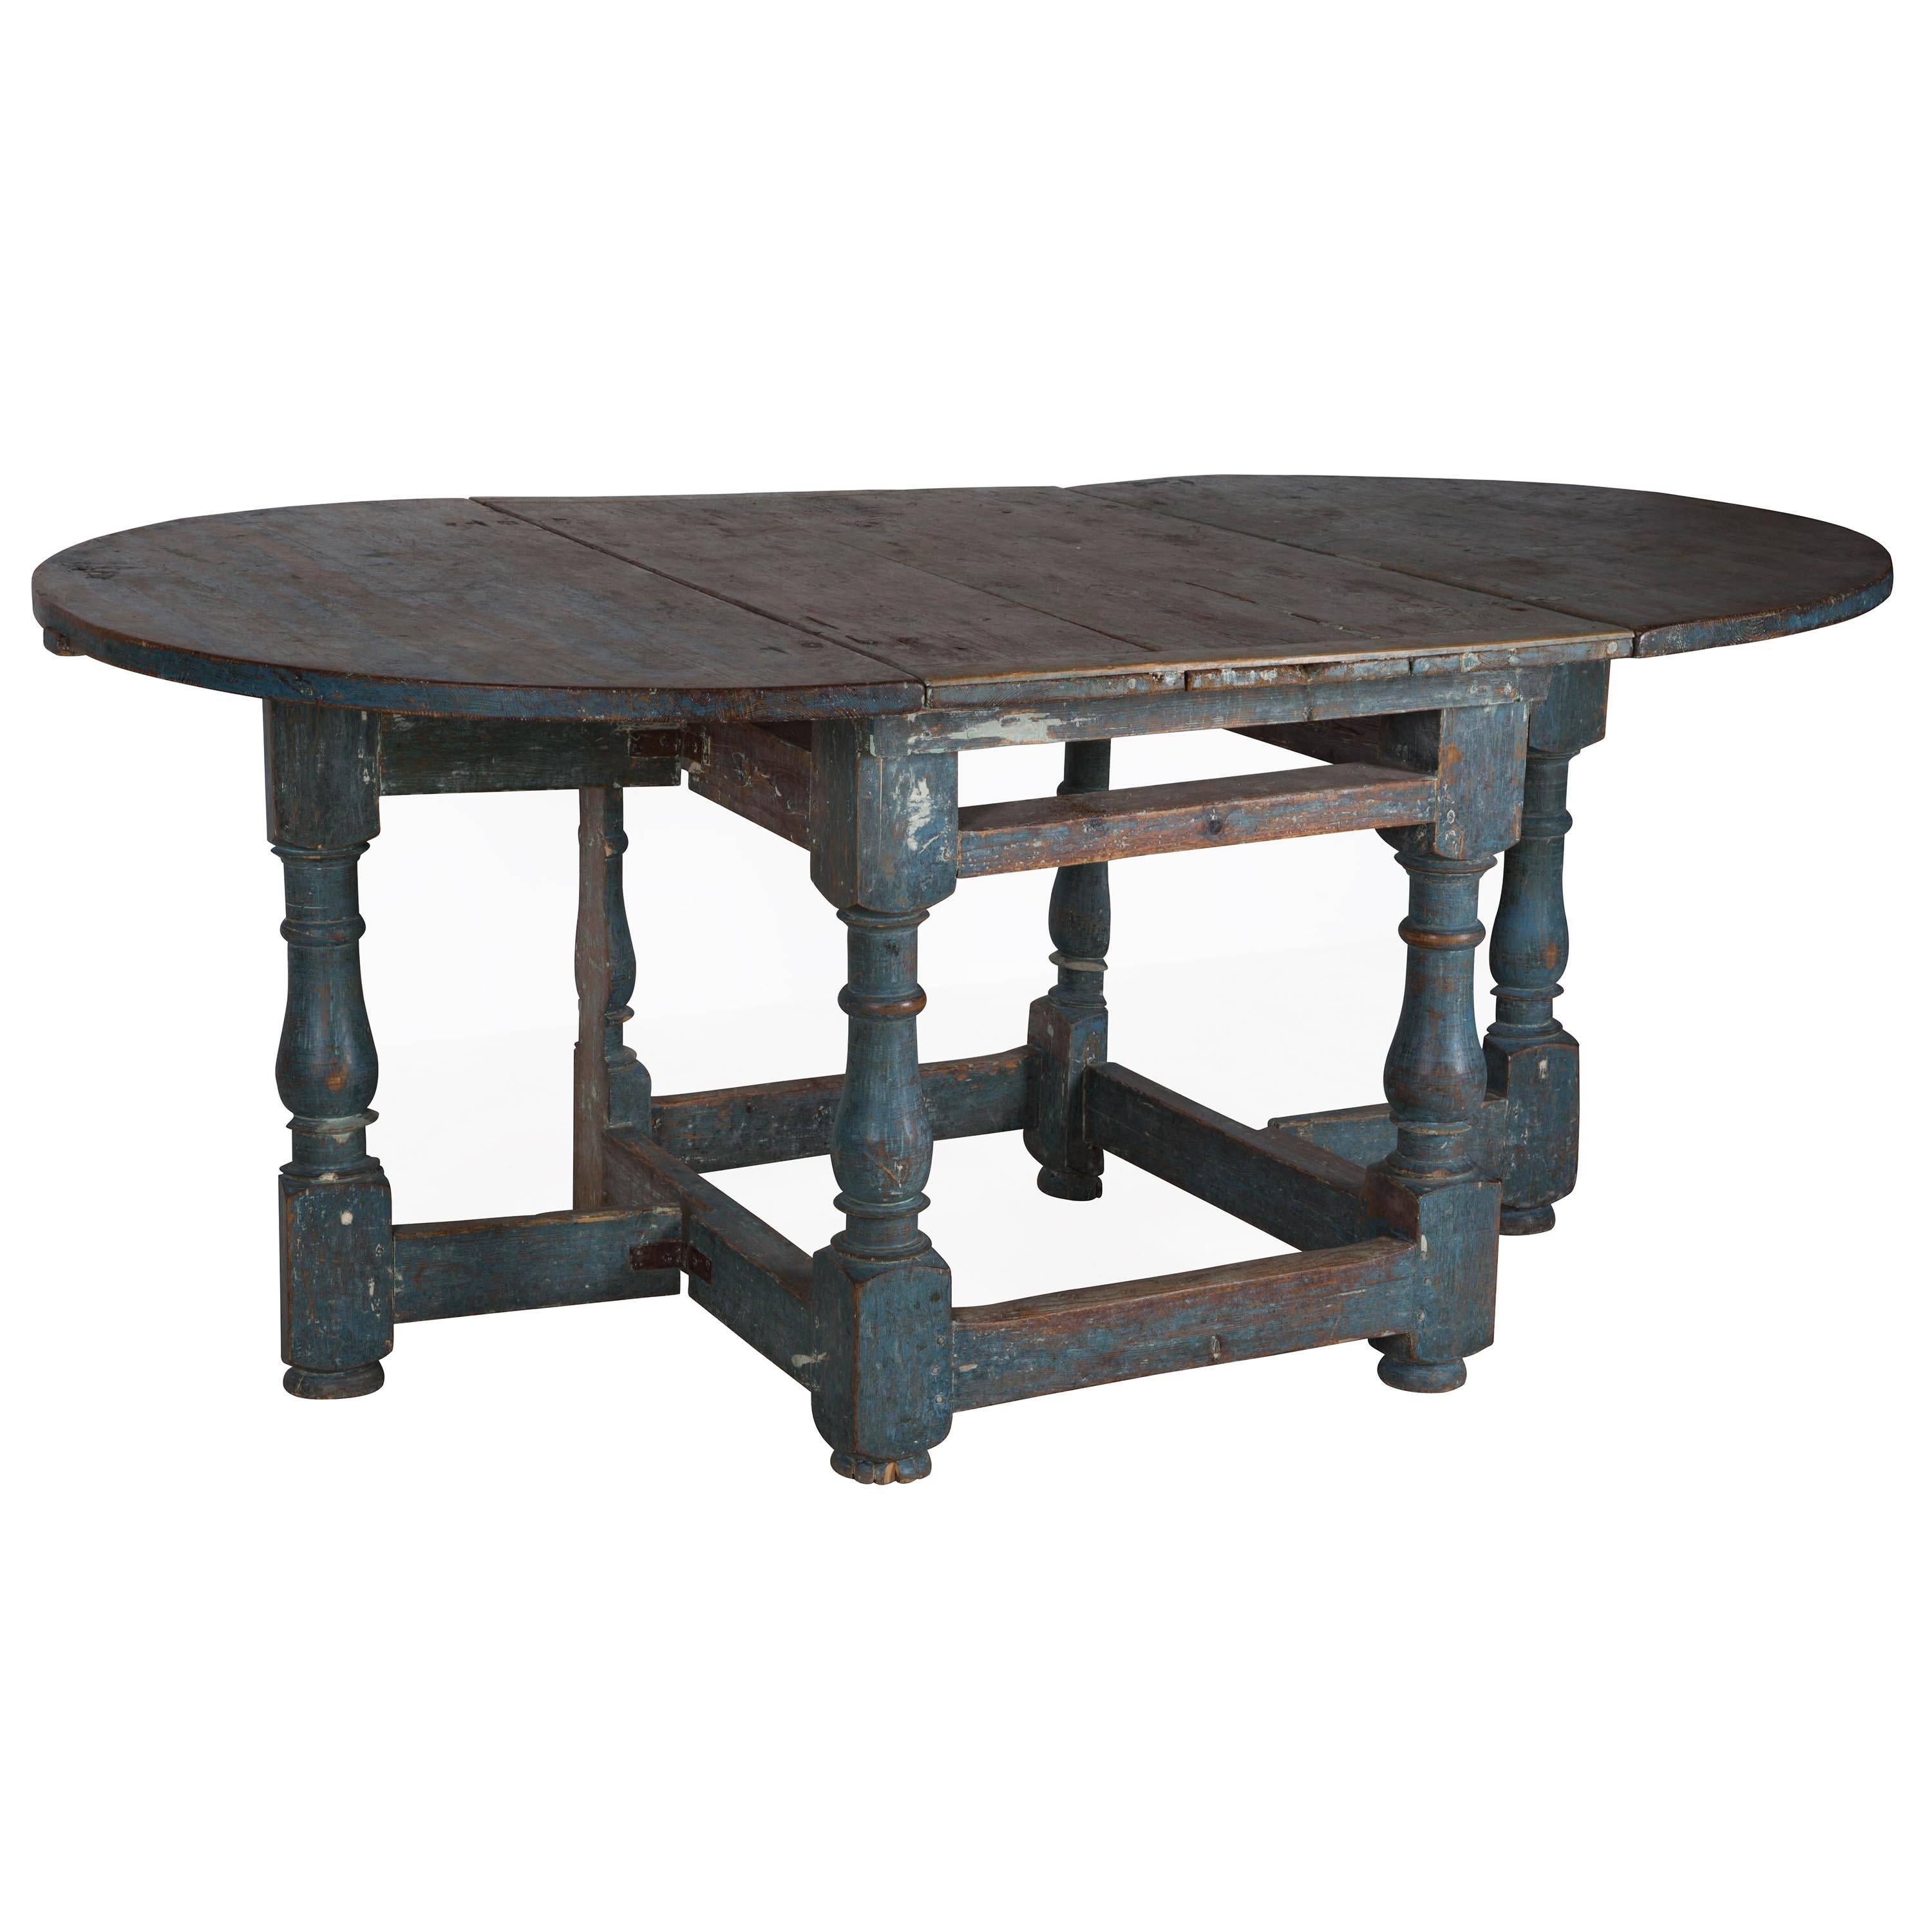 An 18th Century Swedish Provincial drop-leaf dining or centre table in traces of original paint (refreshed).